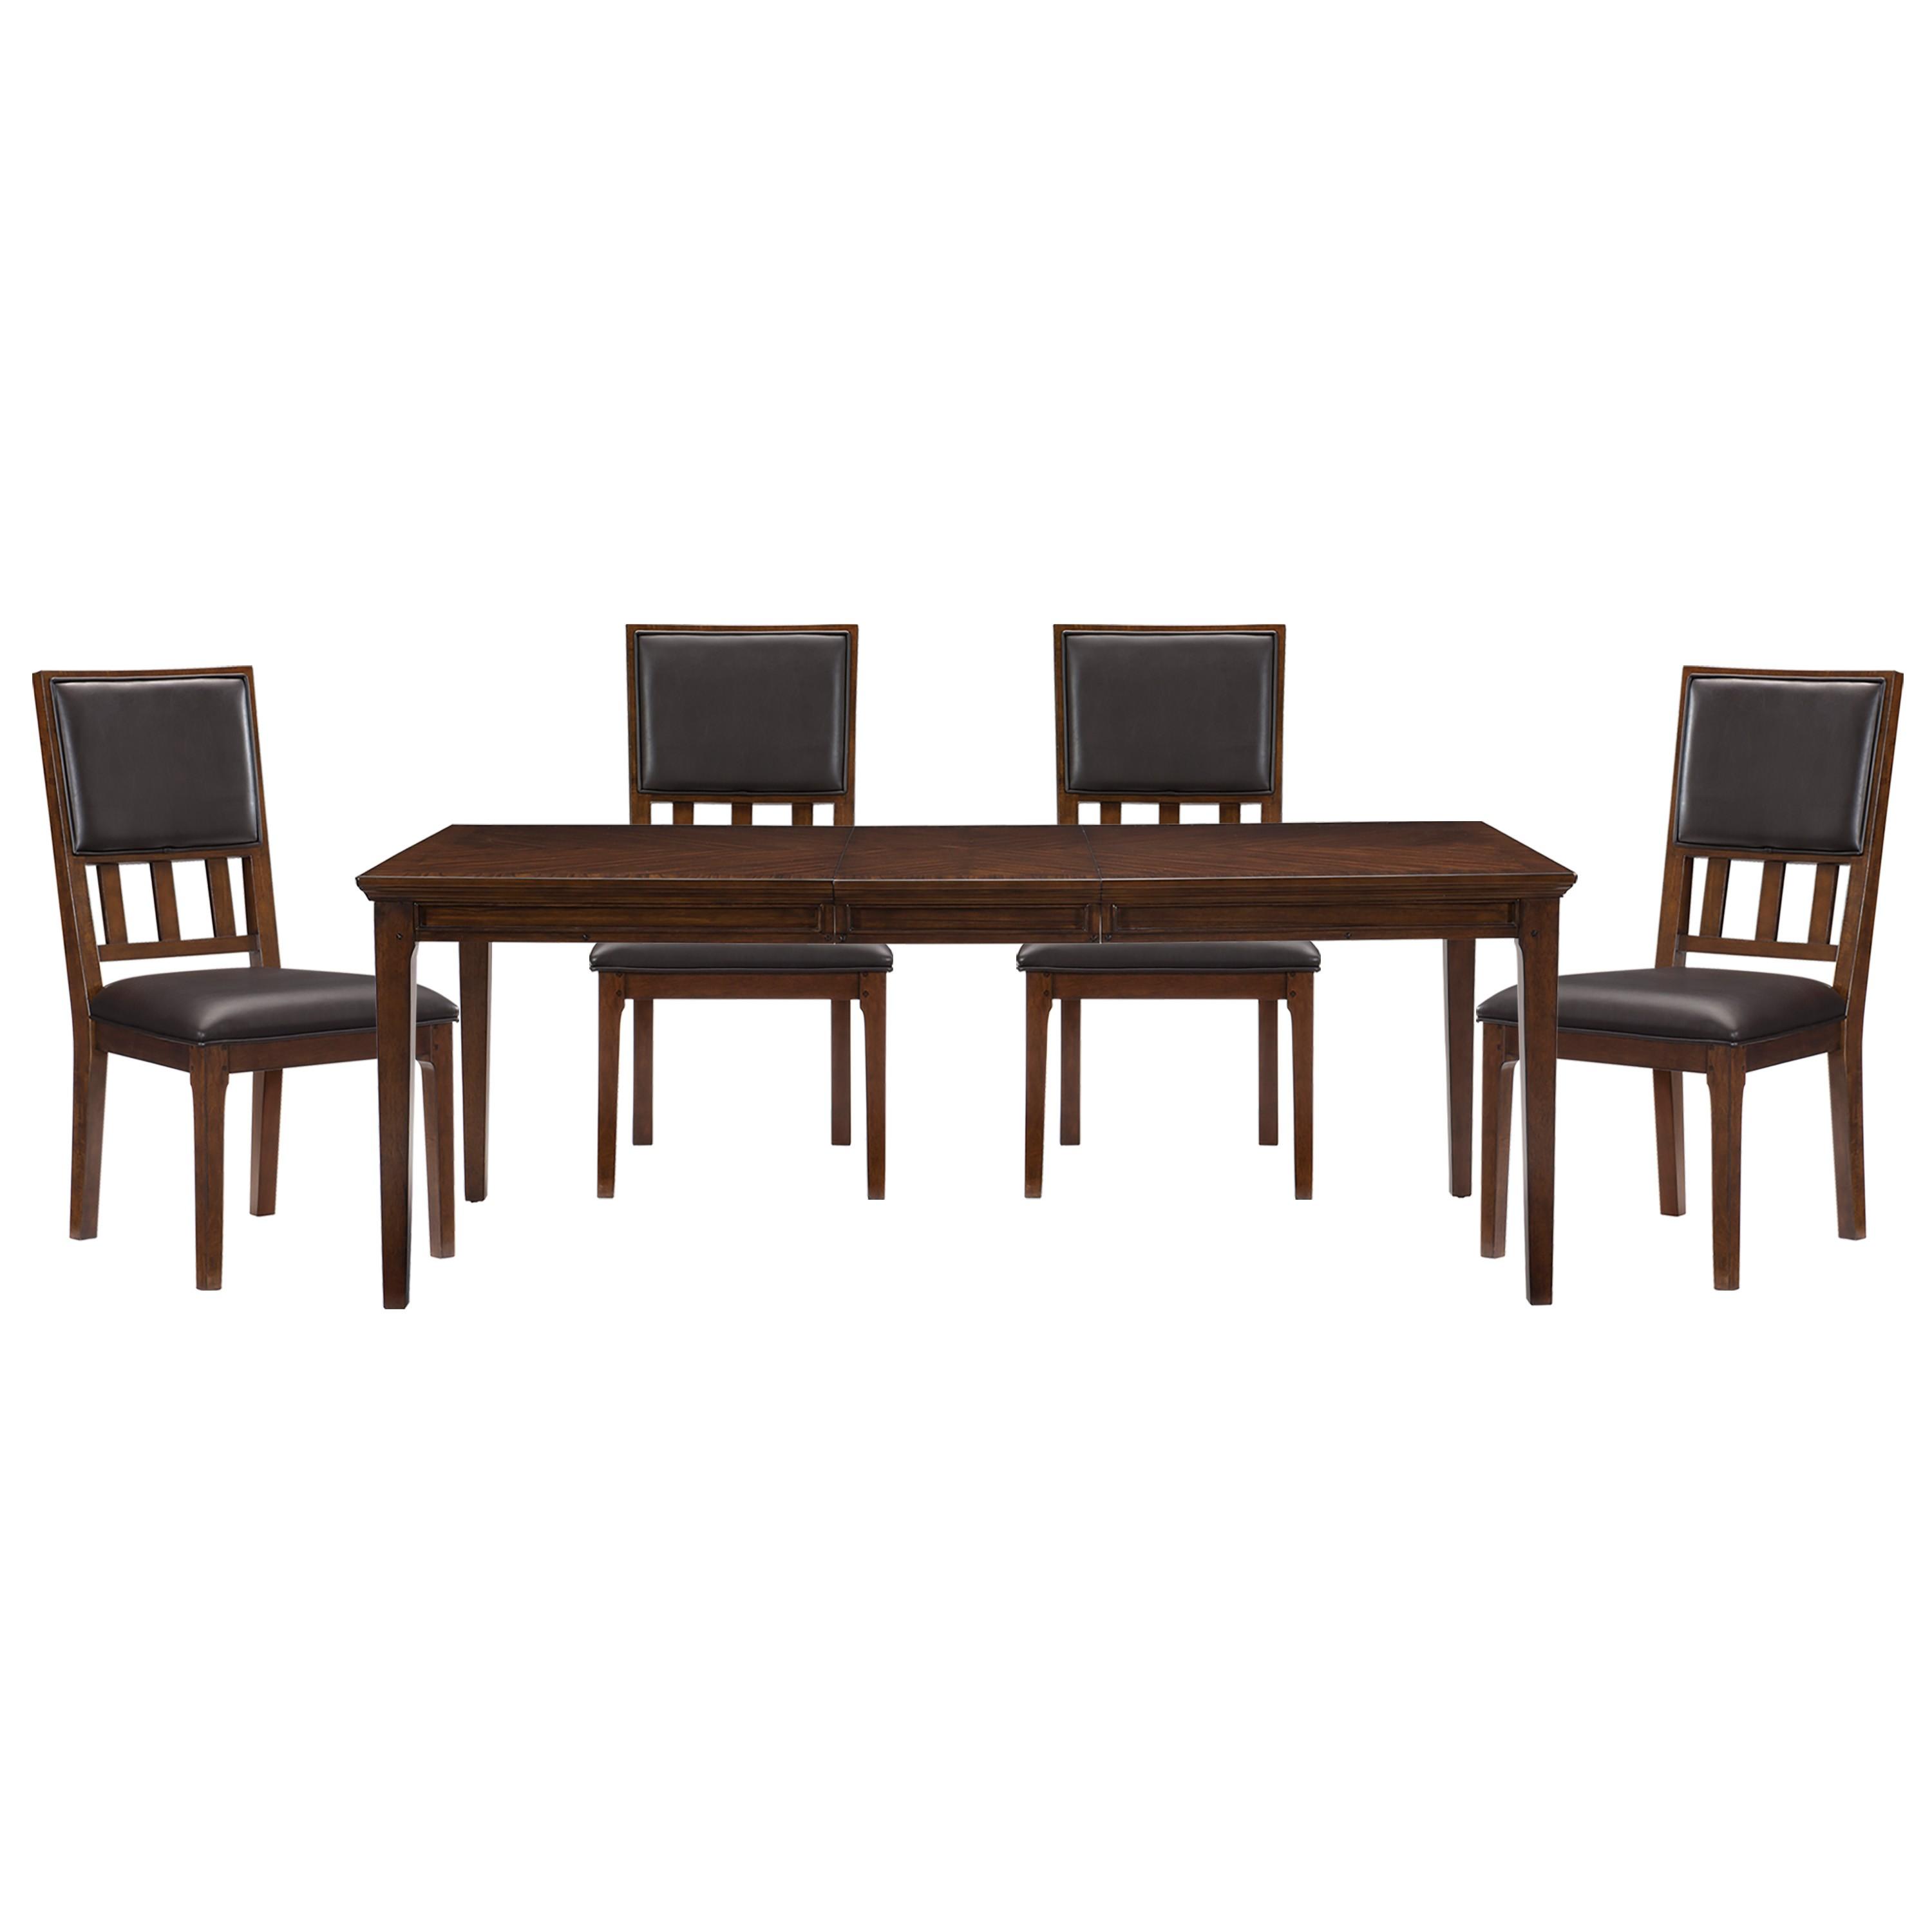 

    
Traditional Brown Cherry Wood Dining Room Set 5pcs Homelegance 1649-82*5 Frazier Park
